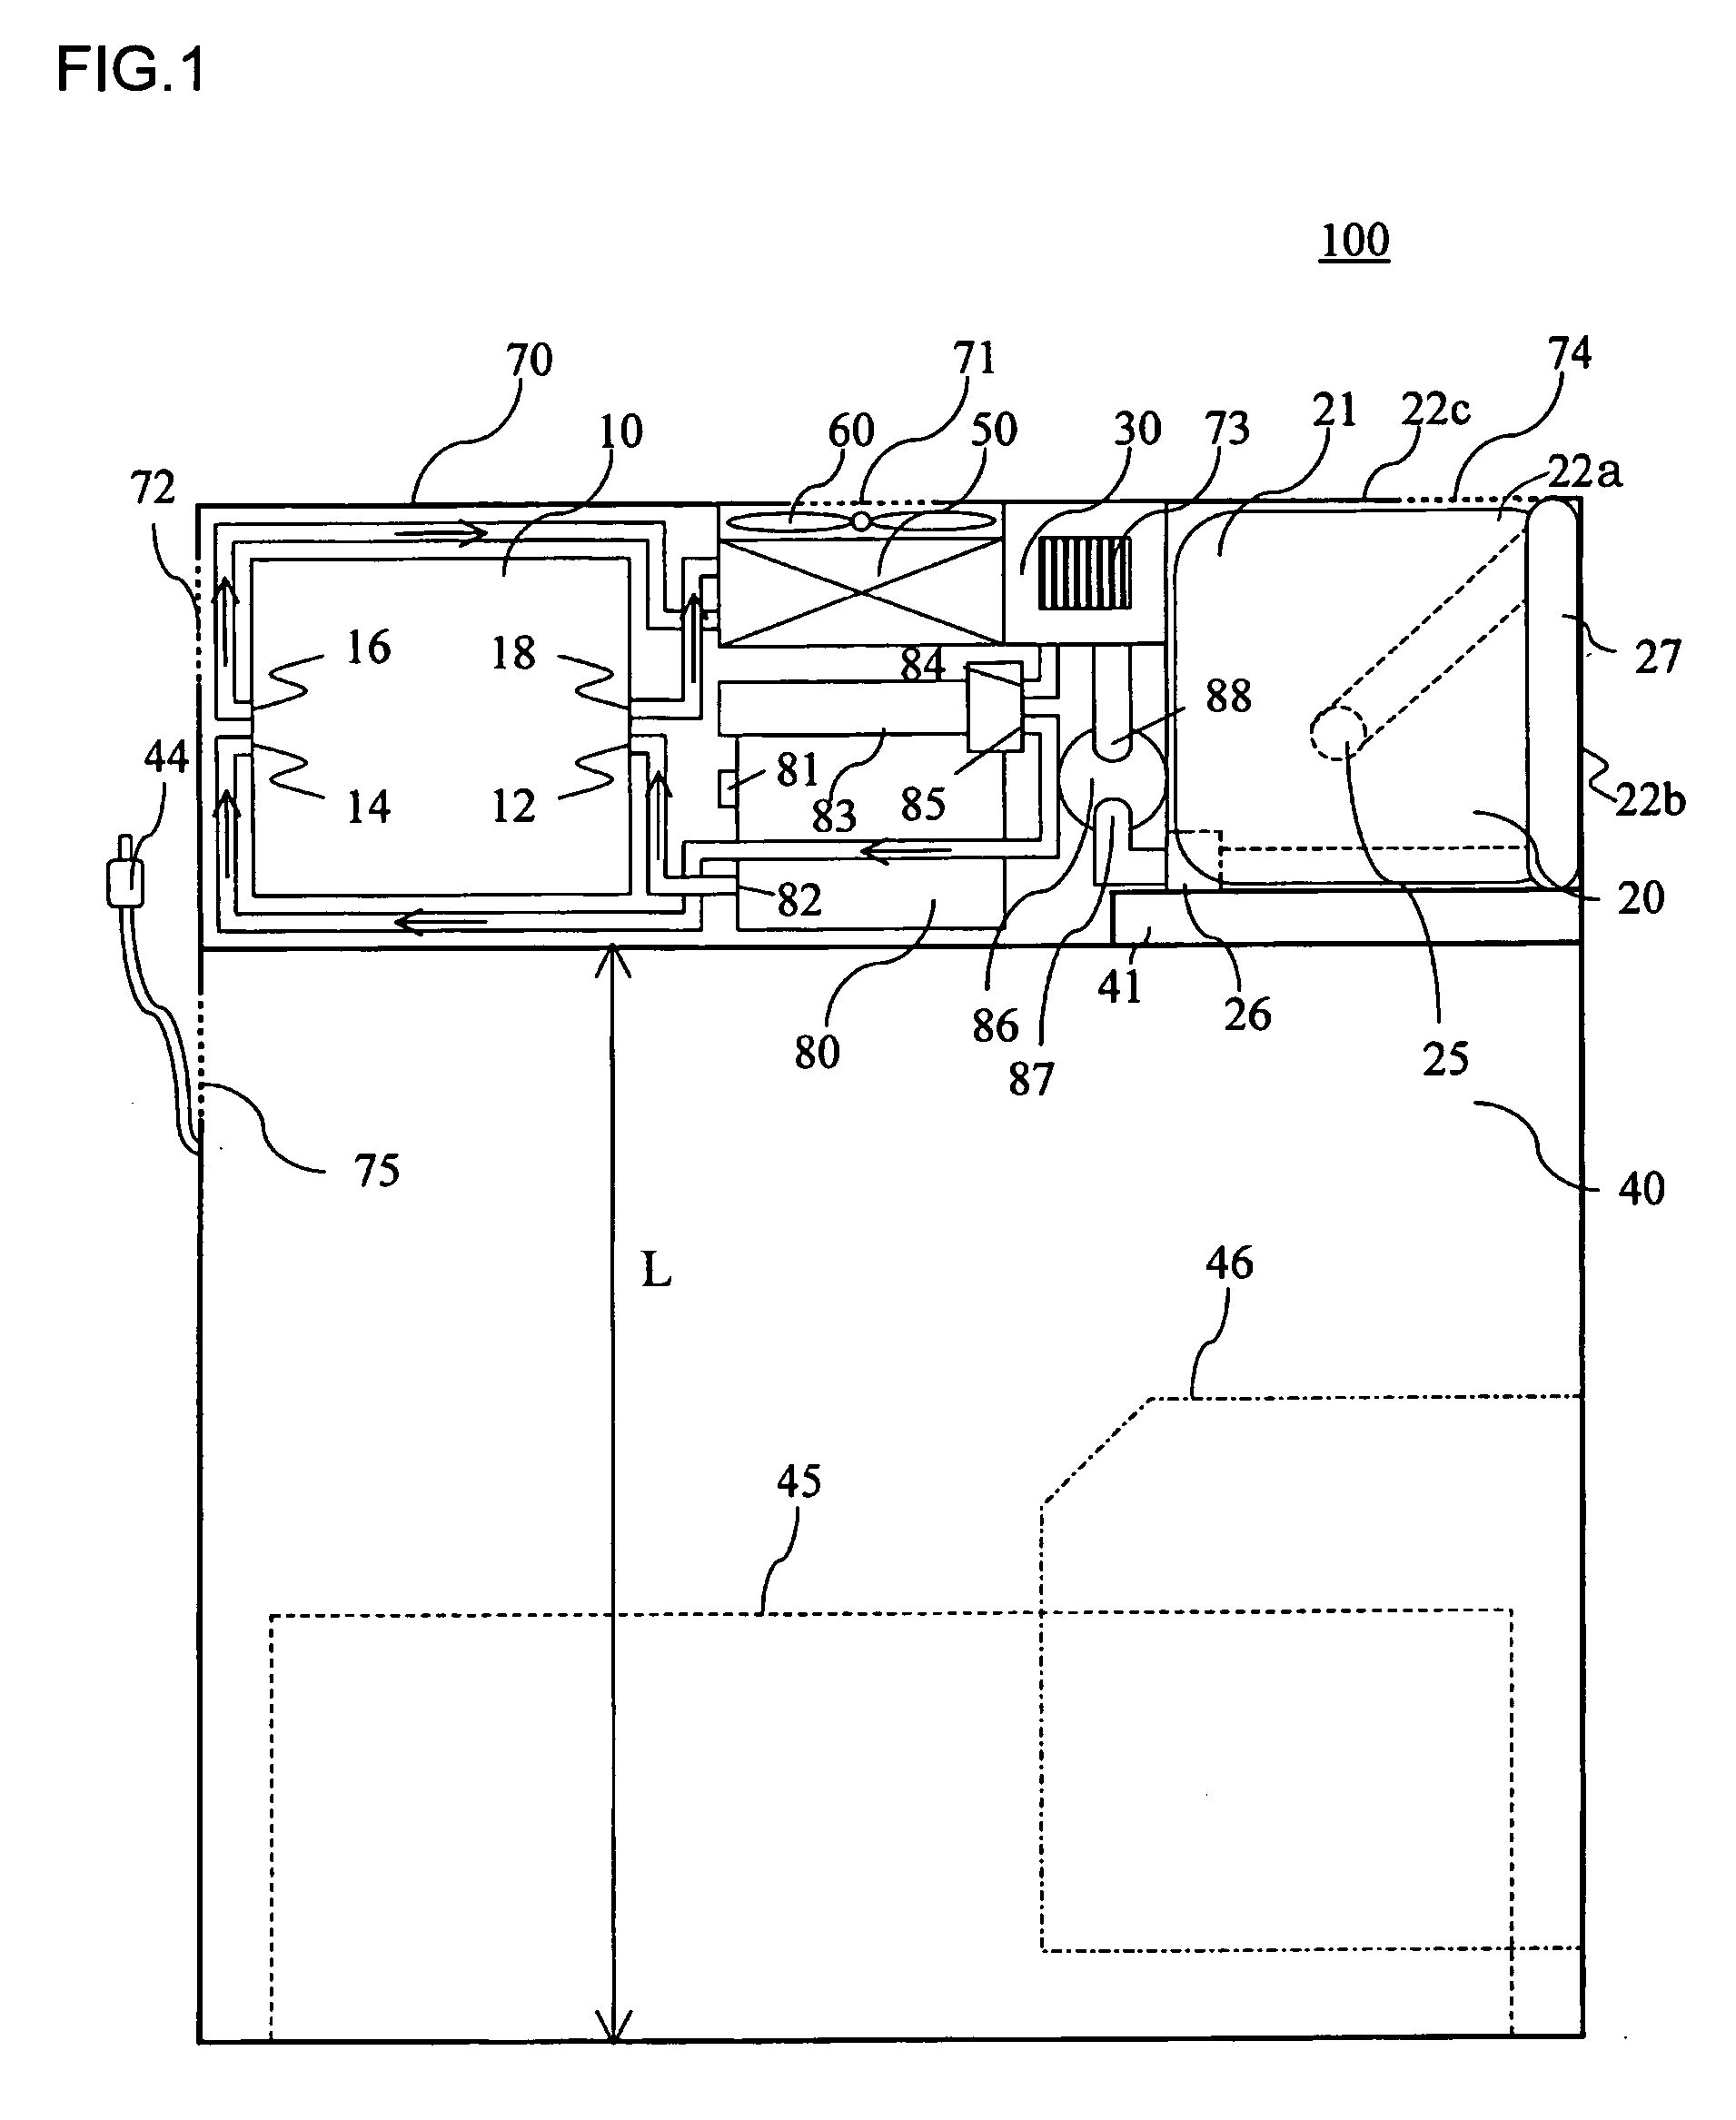 Liquid tank and fuel cell system with fuel monitoring